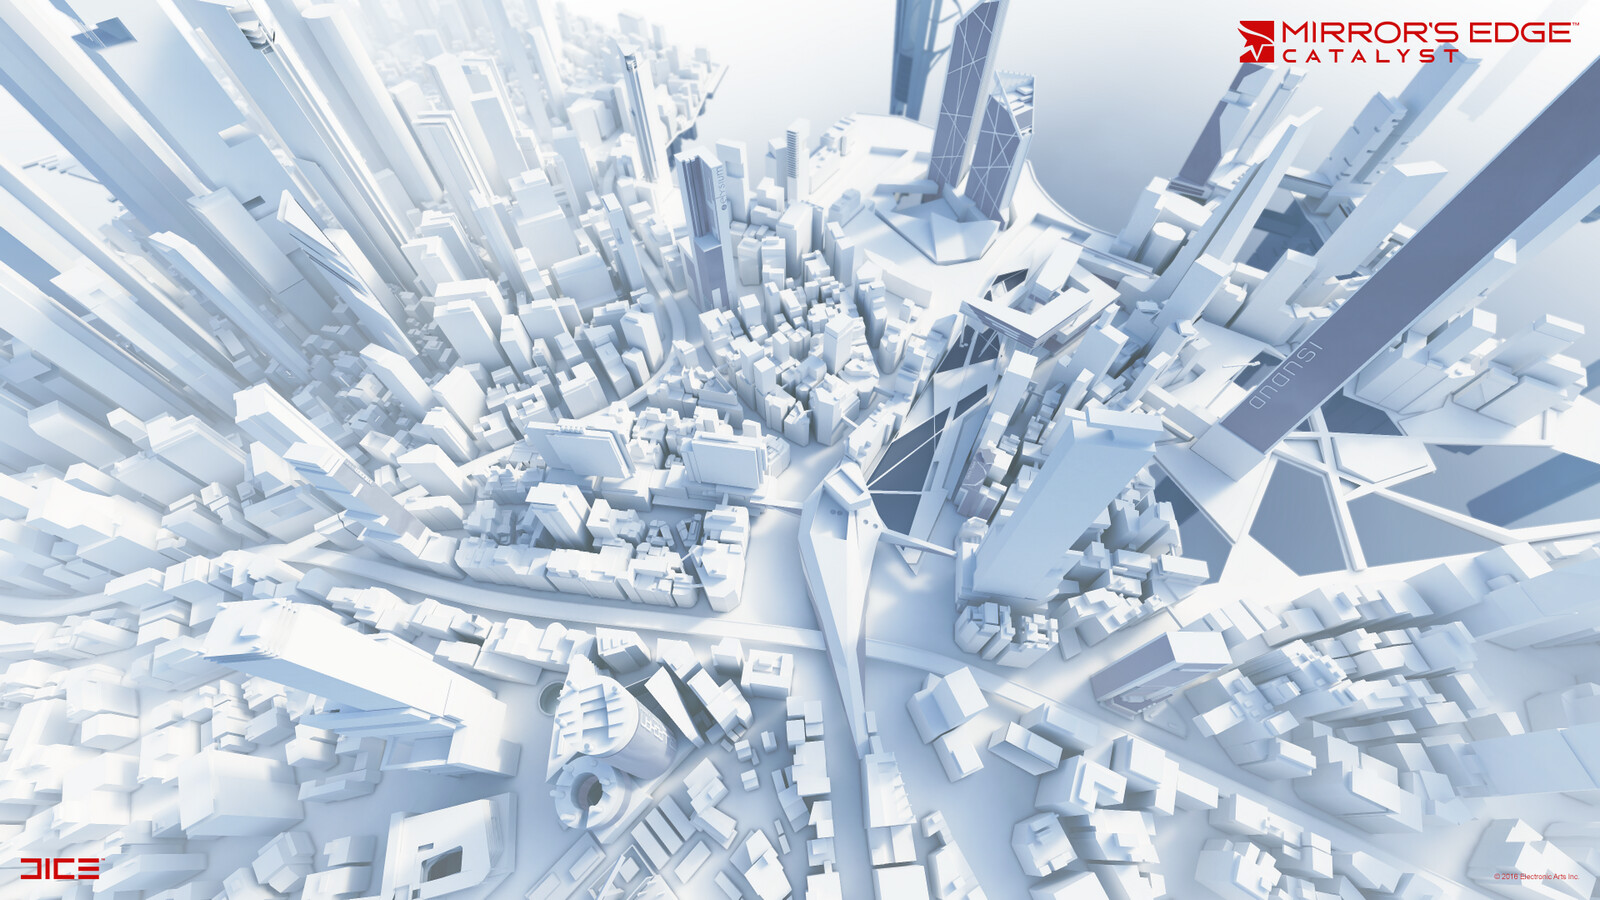 Worked on the modeling, shading and rendering of map. You can explore the map on the website and on your phone as well: http://www.mirrorsedge.com/map